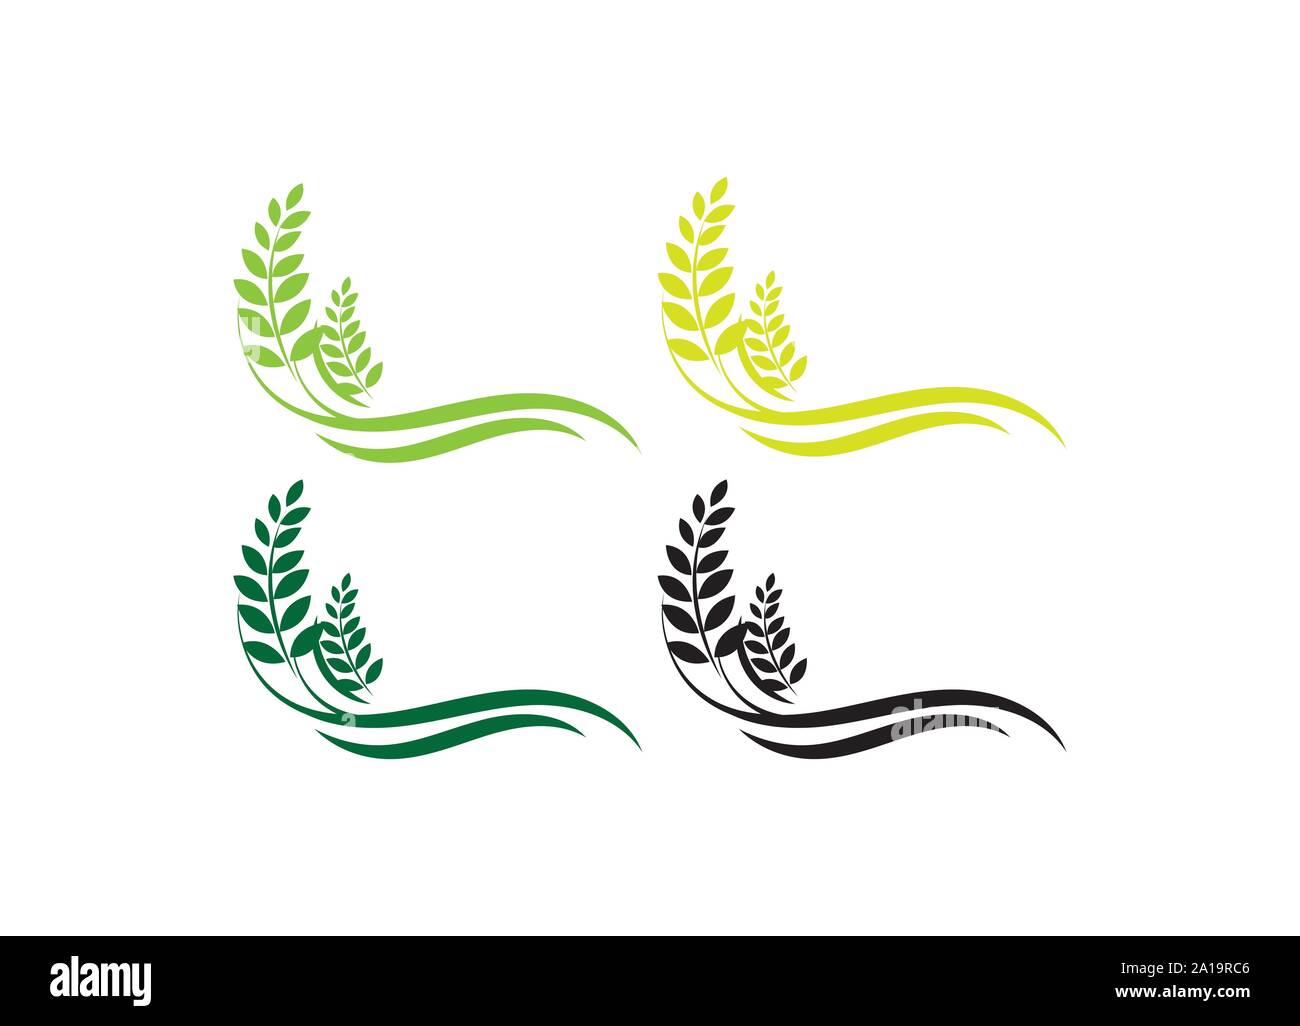 Agriculture wheat Logo Template vector icon design, Ears of Wheat, Barley or Rye vector visual graphic icons, Agriculture icon. Stock Vector